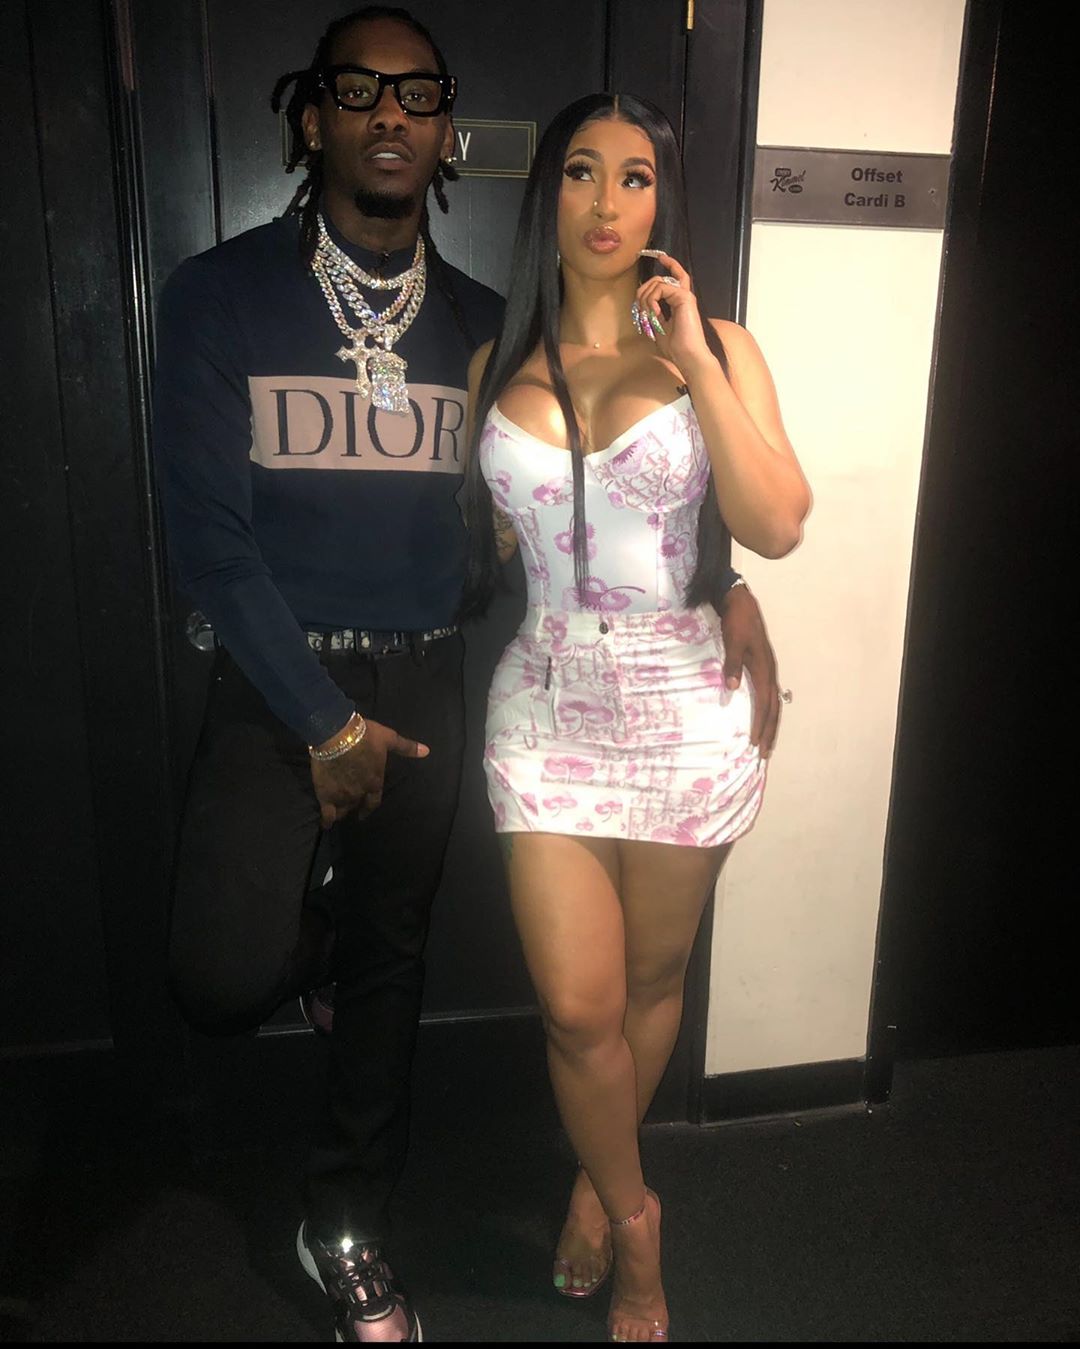 Cardi B and Offset visit Jimmy Kimmel in his-and-hers Dior outfits